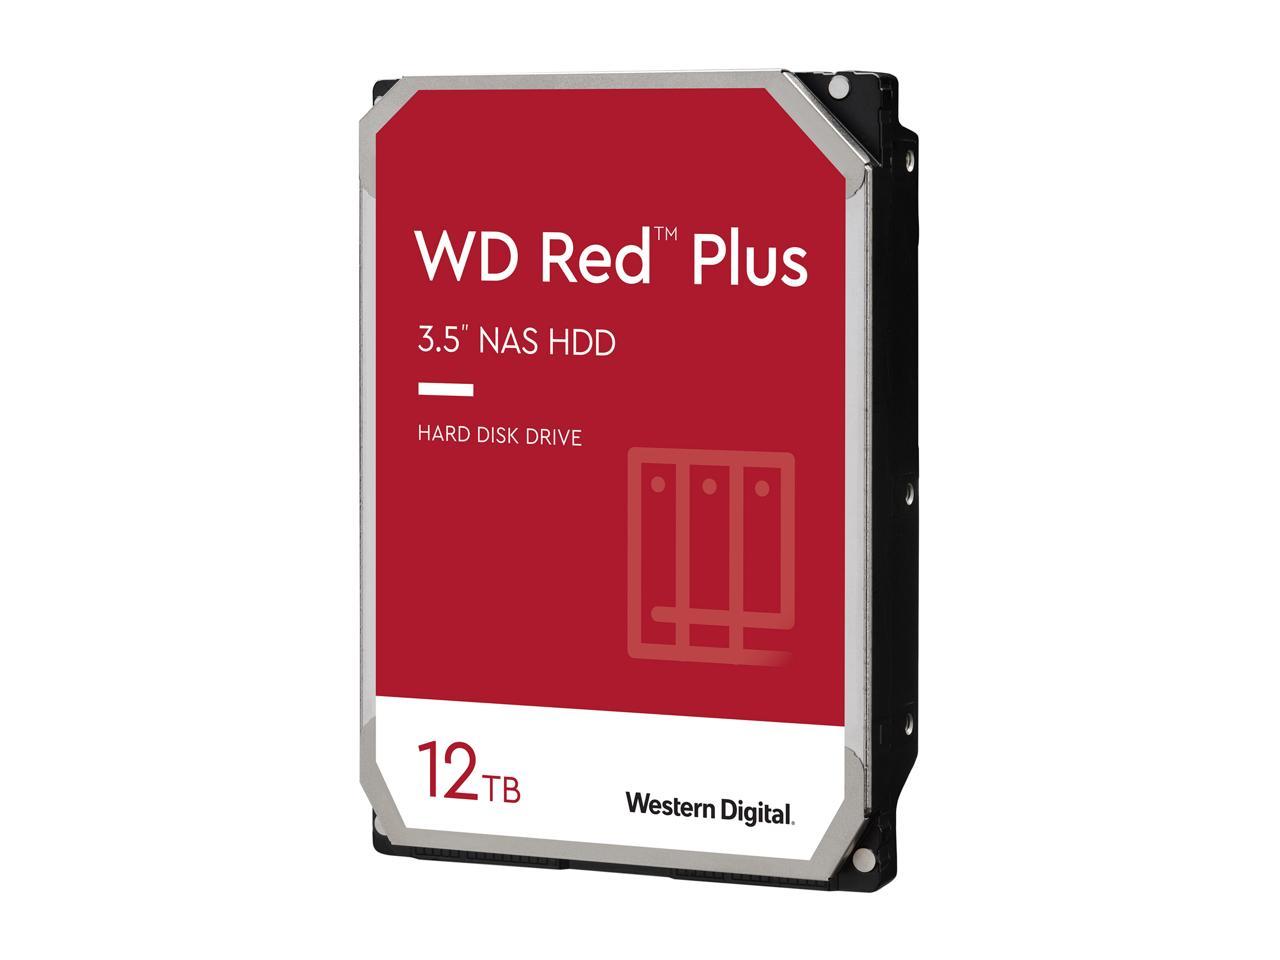 Wd Red Plus 12Tb Nas Hard Disk Drive - 7200 Rpm Class Sata 6Gb/S, Cmr, 256Mb Cache, 3.5 Inch - Wd120Efbx